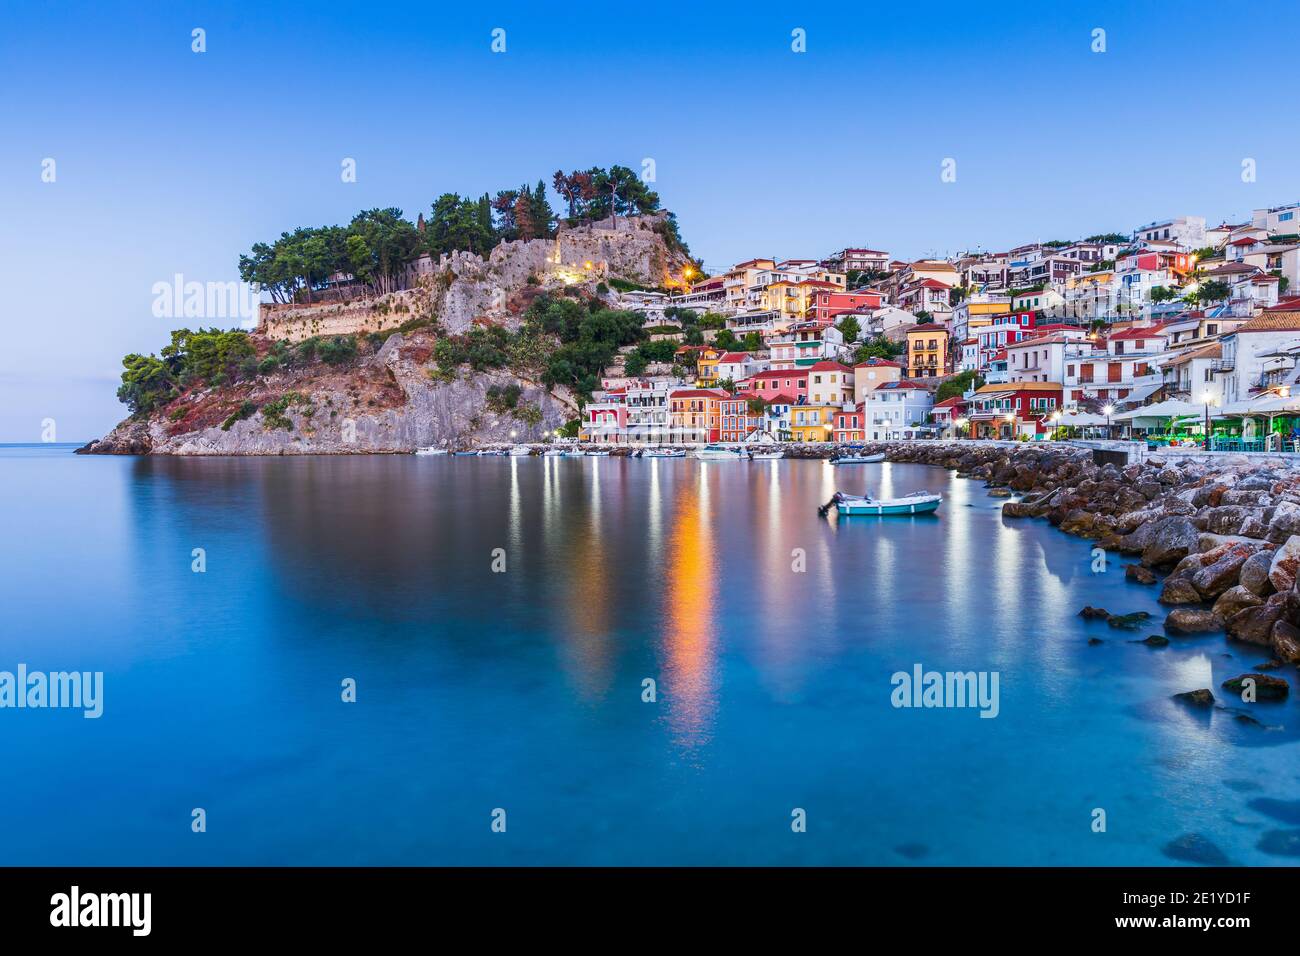 Parga, Greece. Waterfront of the Resort town on the Ionian coast. Stock Photo